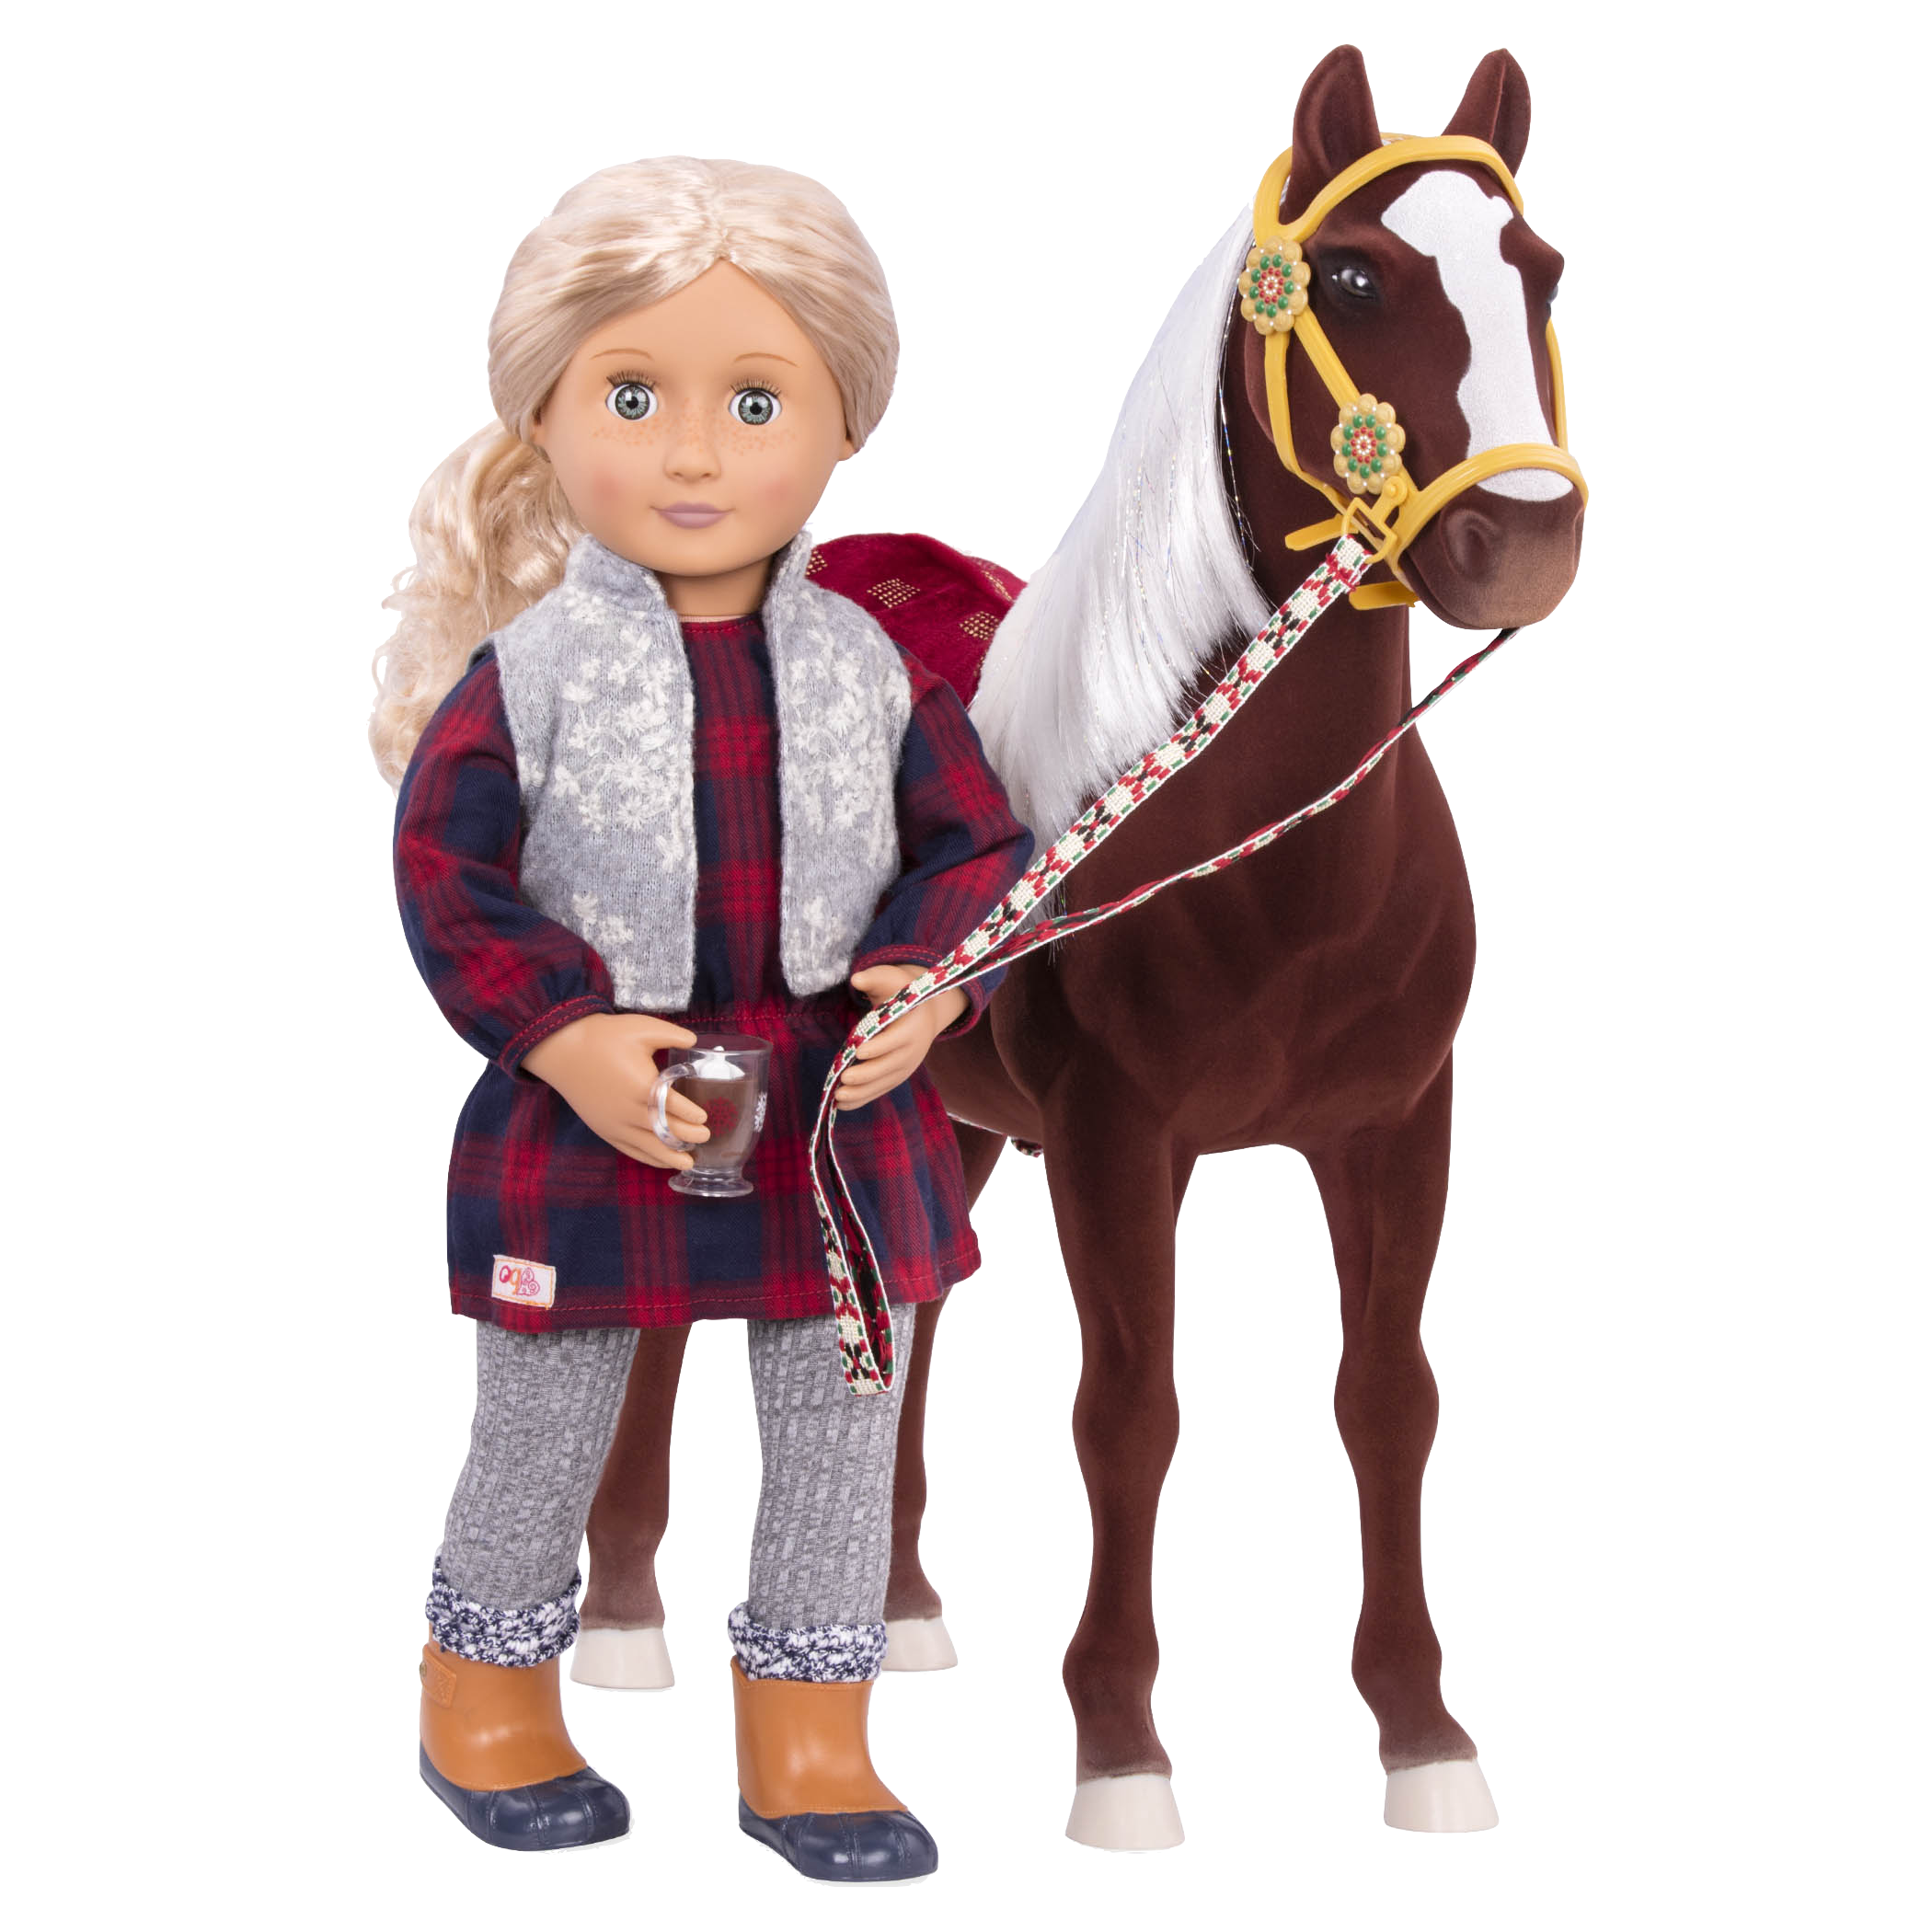 Coral and Winter Wonder horse wearing cocoa cozy outfit